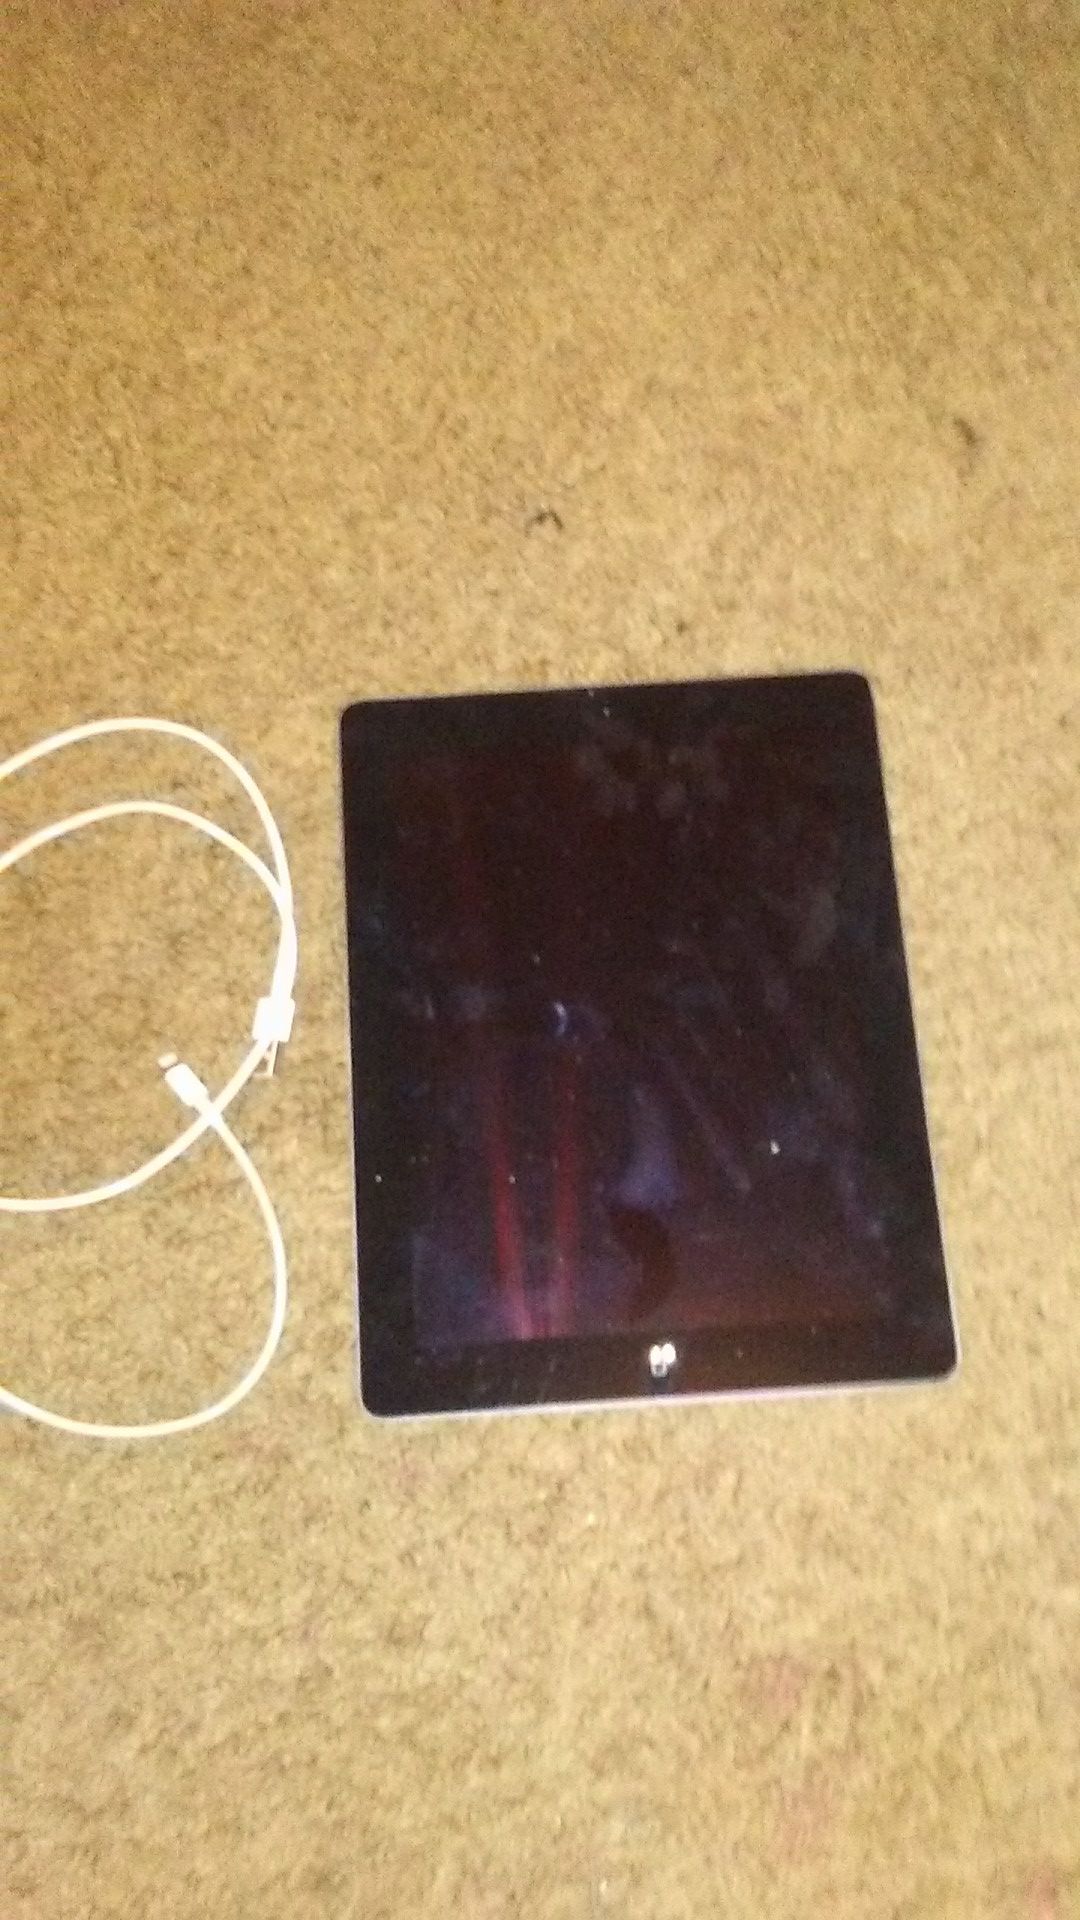 iPad 5 with charger